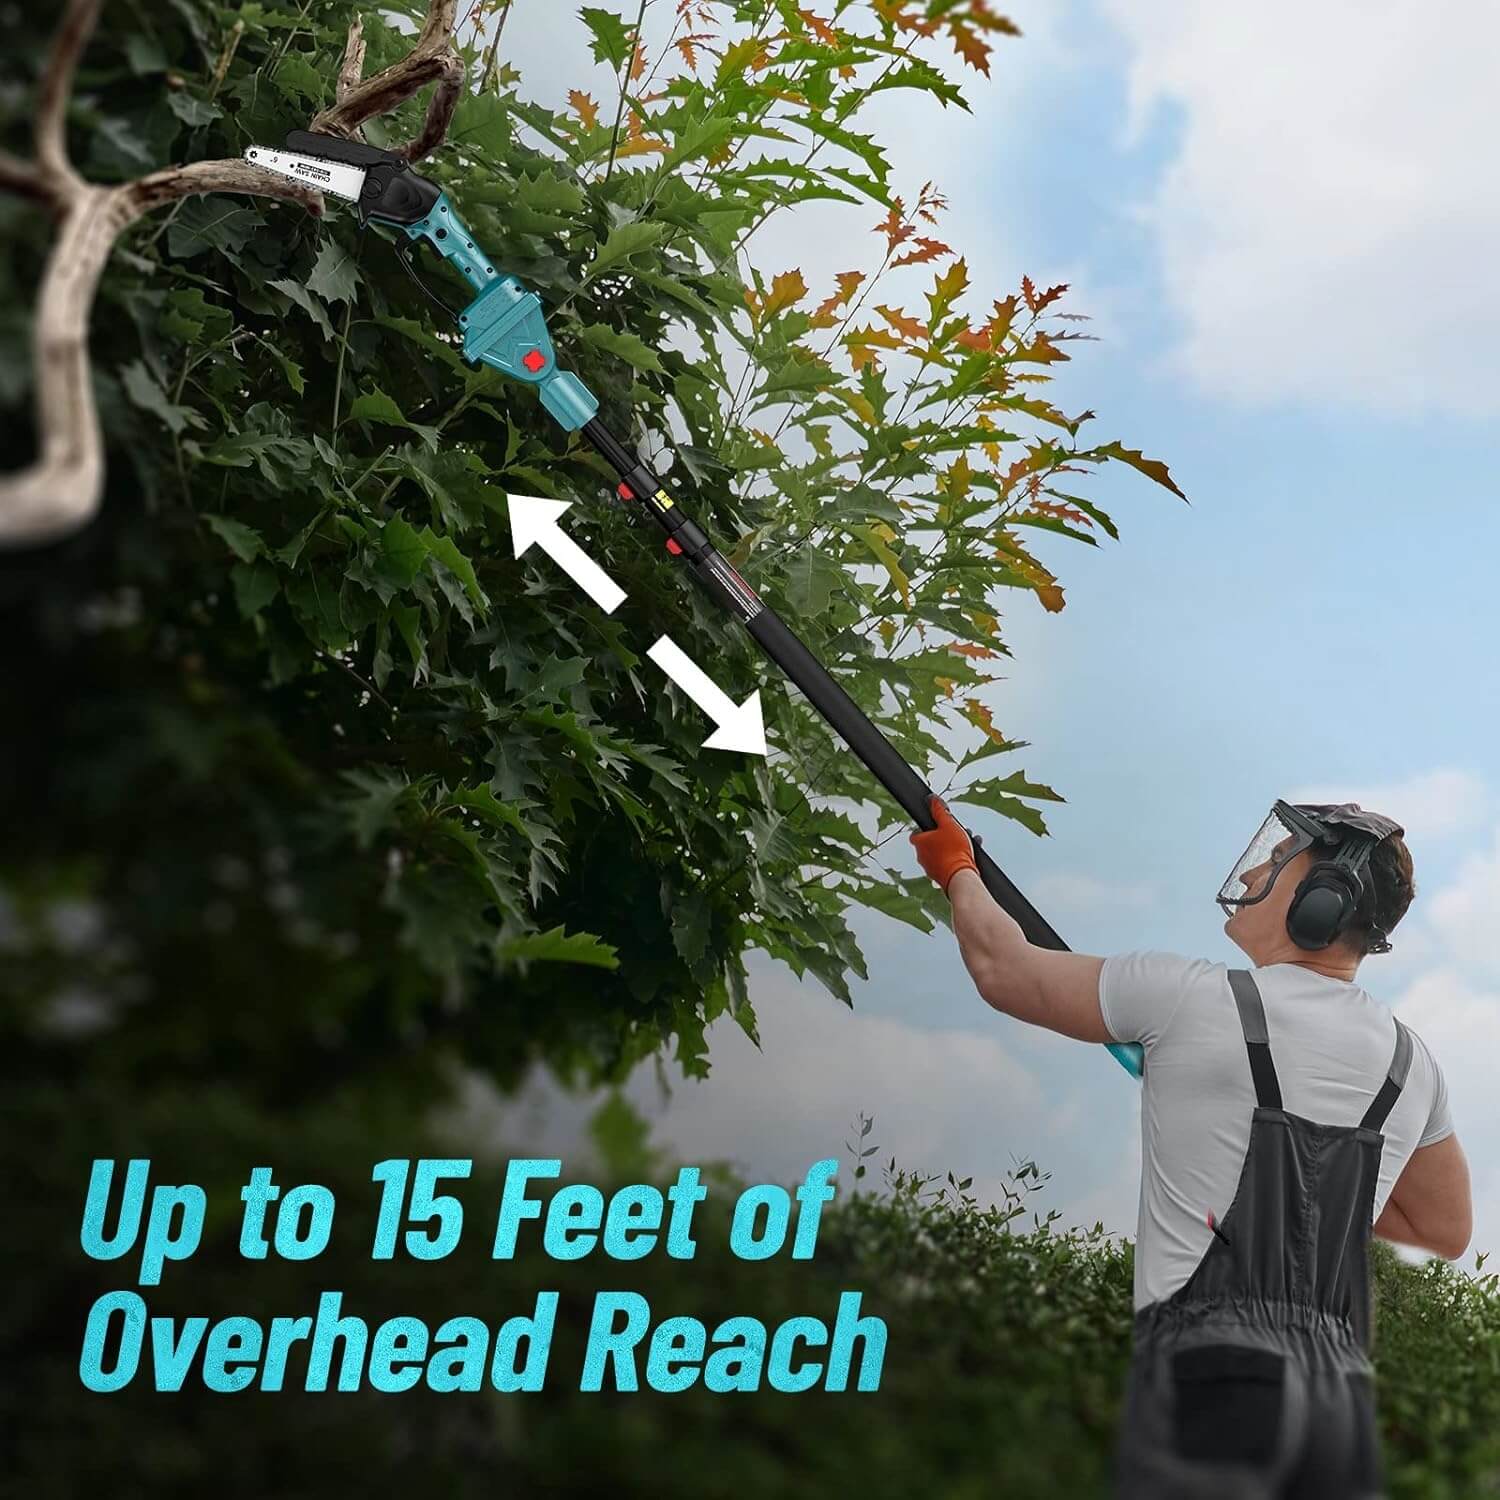 Based on extensive research on battery chain saws, iToolMax has undergone numerous updates. Our long handle saw has a 4-section extension pole, allowing you to extend it to 4.6~9 feet for pruning tall branches, Bed backs/borders and generally hard-to-reach areas, and with the adult height (6 feet) you can reach up to 15 feet, making trimming tasks an easy task.